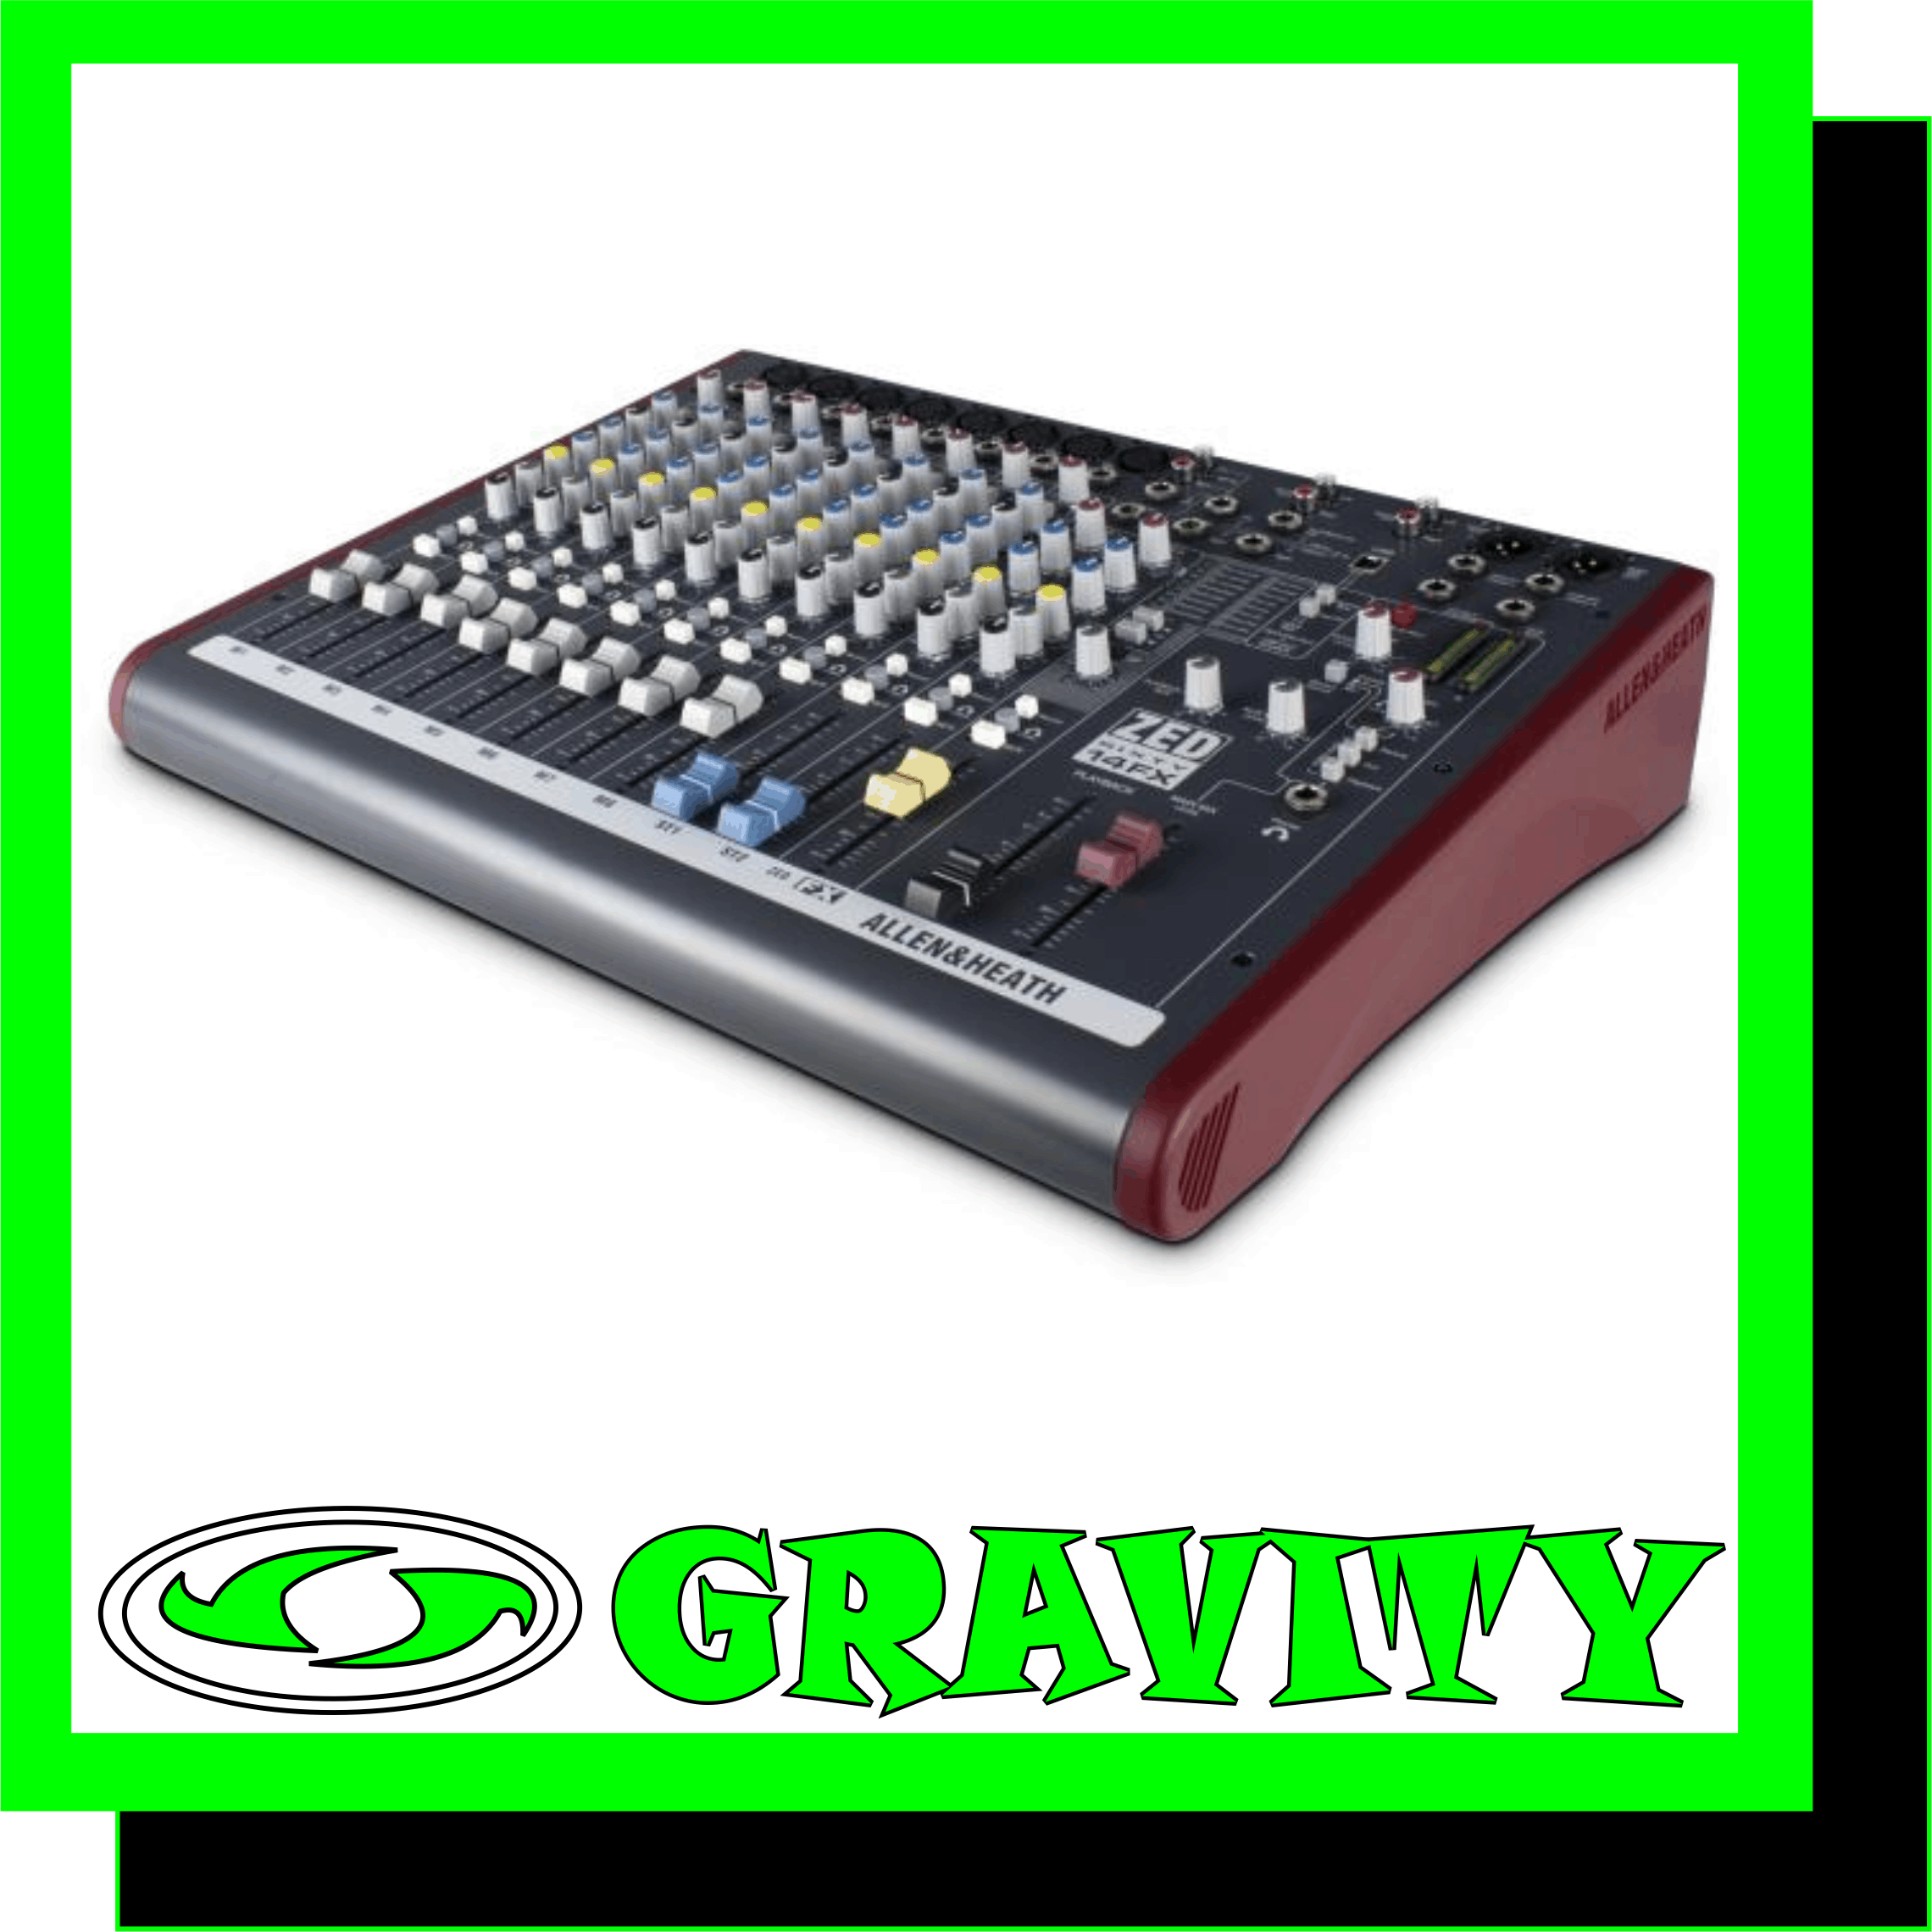 ZED60-14FX   Live or in the studio, ZED60-14FX is a compact, portable mixer that is ideal for small bands.  FEATURE SUMMARY: -8 mic/line inputs, 2 with Class A FET high impedance -60mm professional quality faders -Responsive 3-band, swept mid EQ with MusiQ -Configurable USB stereo audio in/out -1 pre-fade Aux send -1 FX send -2 stereo inputs -Separate 2-track record outputs -16 Internal Effects -XLR main stereo outputs with inserts -Comprehensive monitoring -48V microphone phantom power -DI level switching with Gain Boost -Neutrik XLRs and 1/4 inch jacks  This mixer is a guitarist’s dream. Two of the 8 mono channels have high impedance jack inputs that can take a normal line level or a low level input from a guitar pickup, so guitars can be plugged straight into the mixer without the need for DI boxes. These inputs have been crafted to recreate the sound of a classic tube preamp in a combo or head amp for incredible definition and warmth. Two stereo inputs are provided for MP3/CD players or keyboards.  ZED60-14FX comes with configurable USB audio in/out, making it easy to capture a stereo recording at the gig or in the studio. The mixer is equipped with professional XLR main stereo outputs, a flexible monitoring section with headphone and speaker feed outputs, and 16 stunning FX.  Most important of all, ZED60-14FX lives up to the audio and build quality standards that have made Allen & Heath one of the most trusted names in professional audio for more than 40 years.